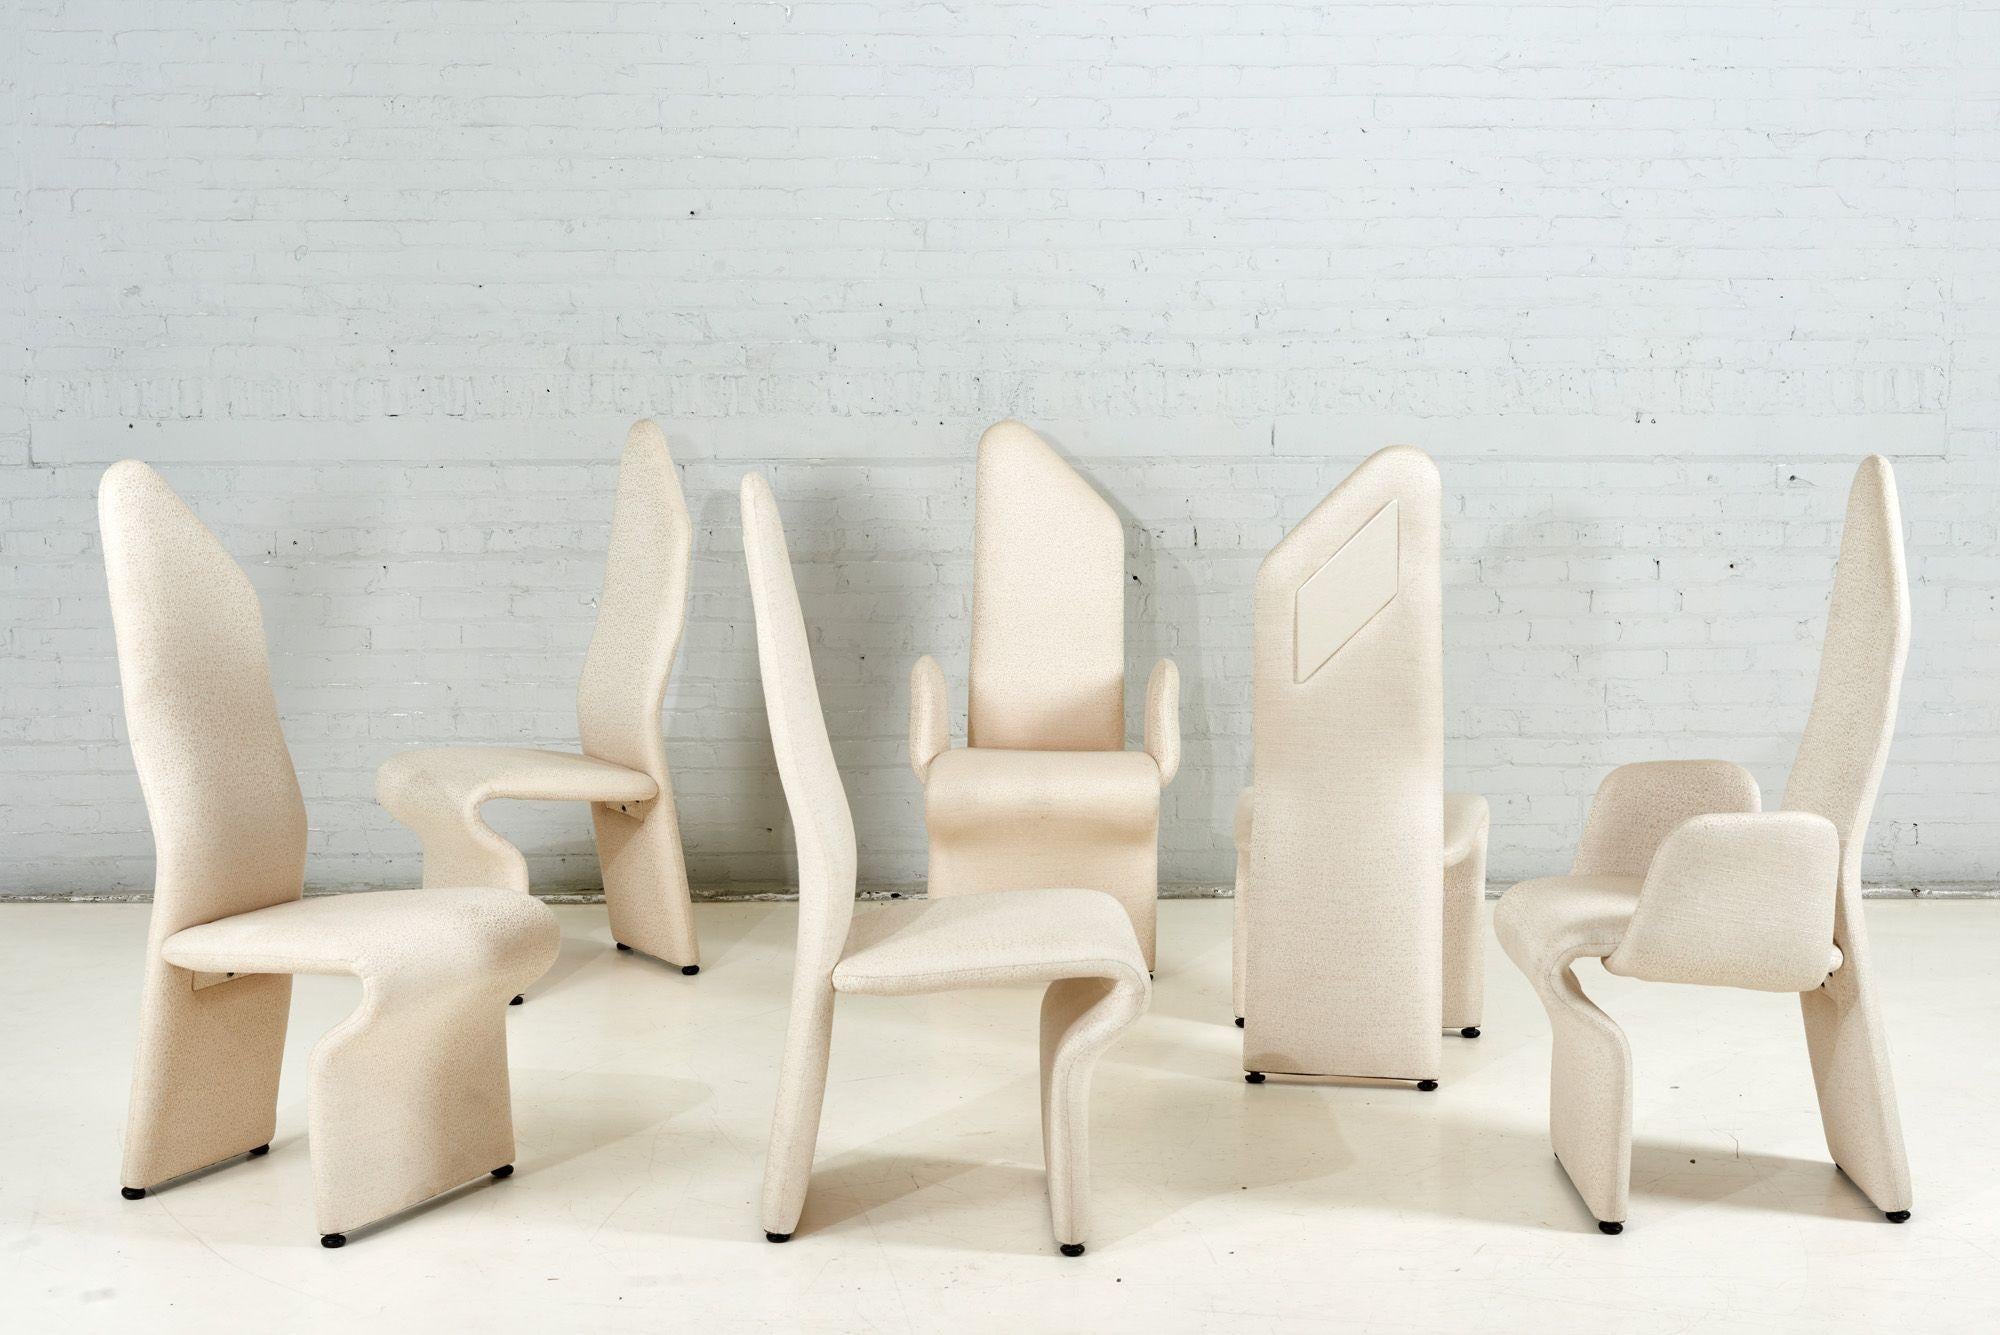 Post-Modern Roger Rougier Set of 6 Post Modern Dining Chairs, 1980 For Sale